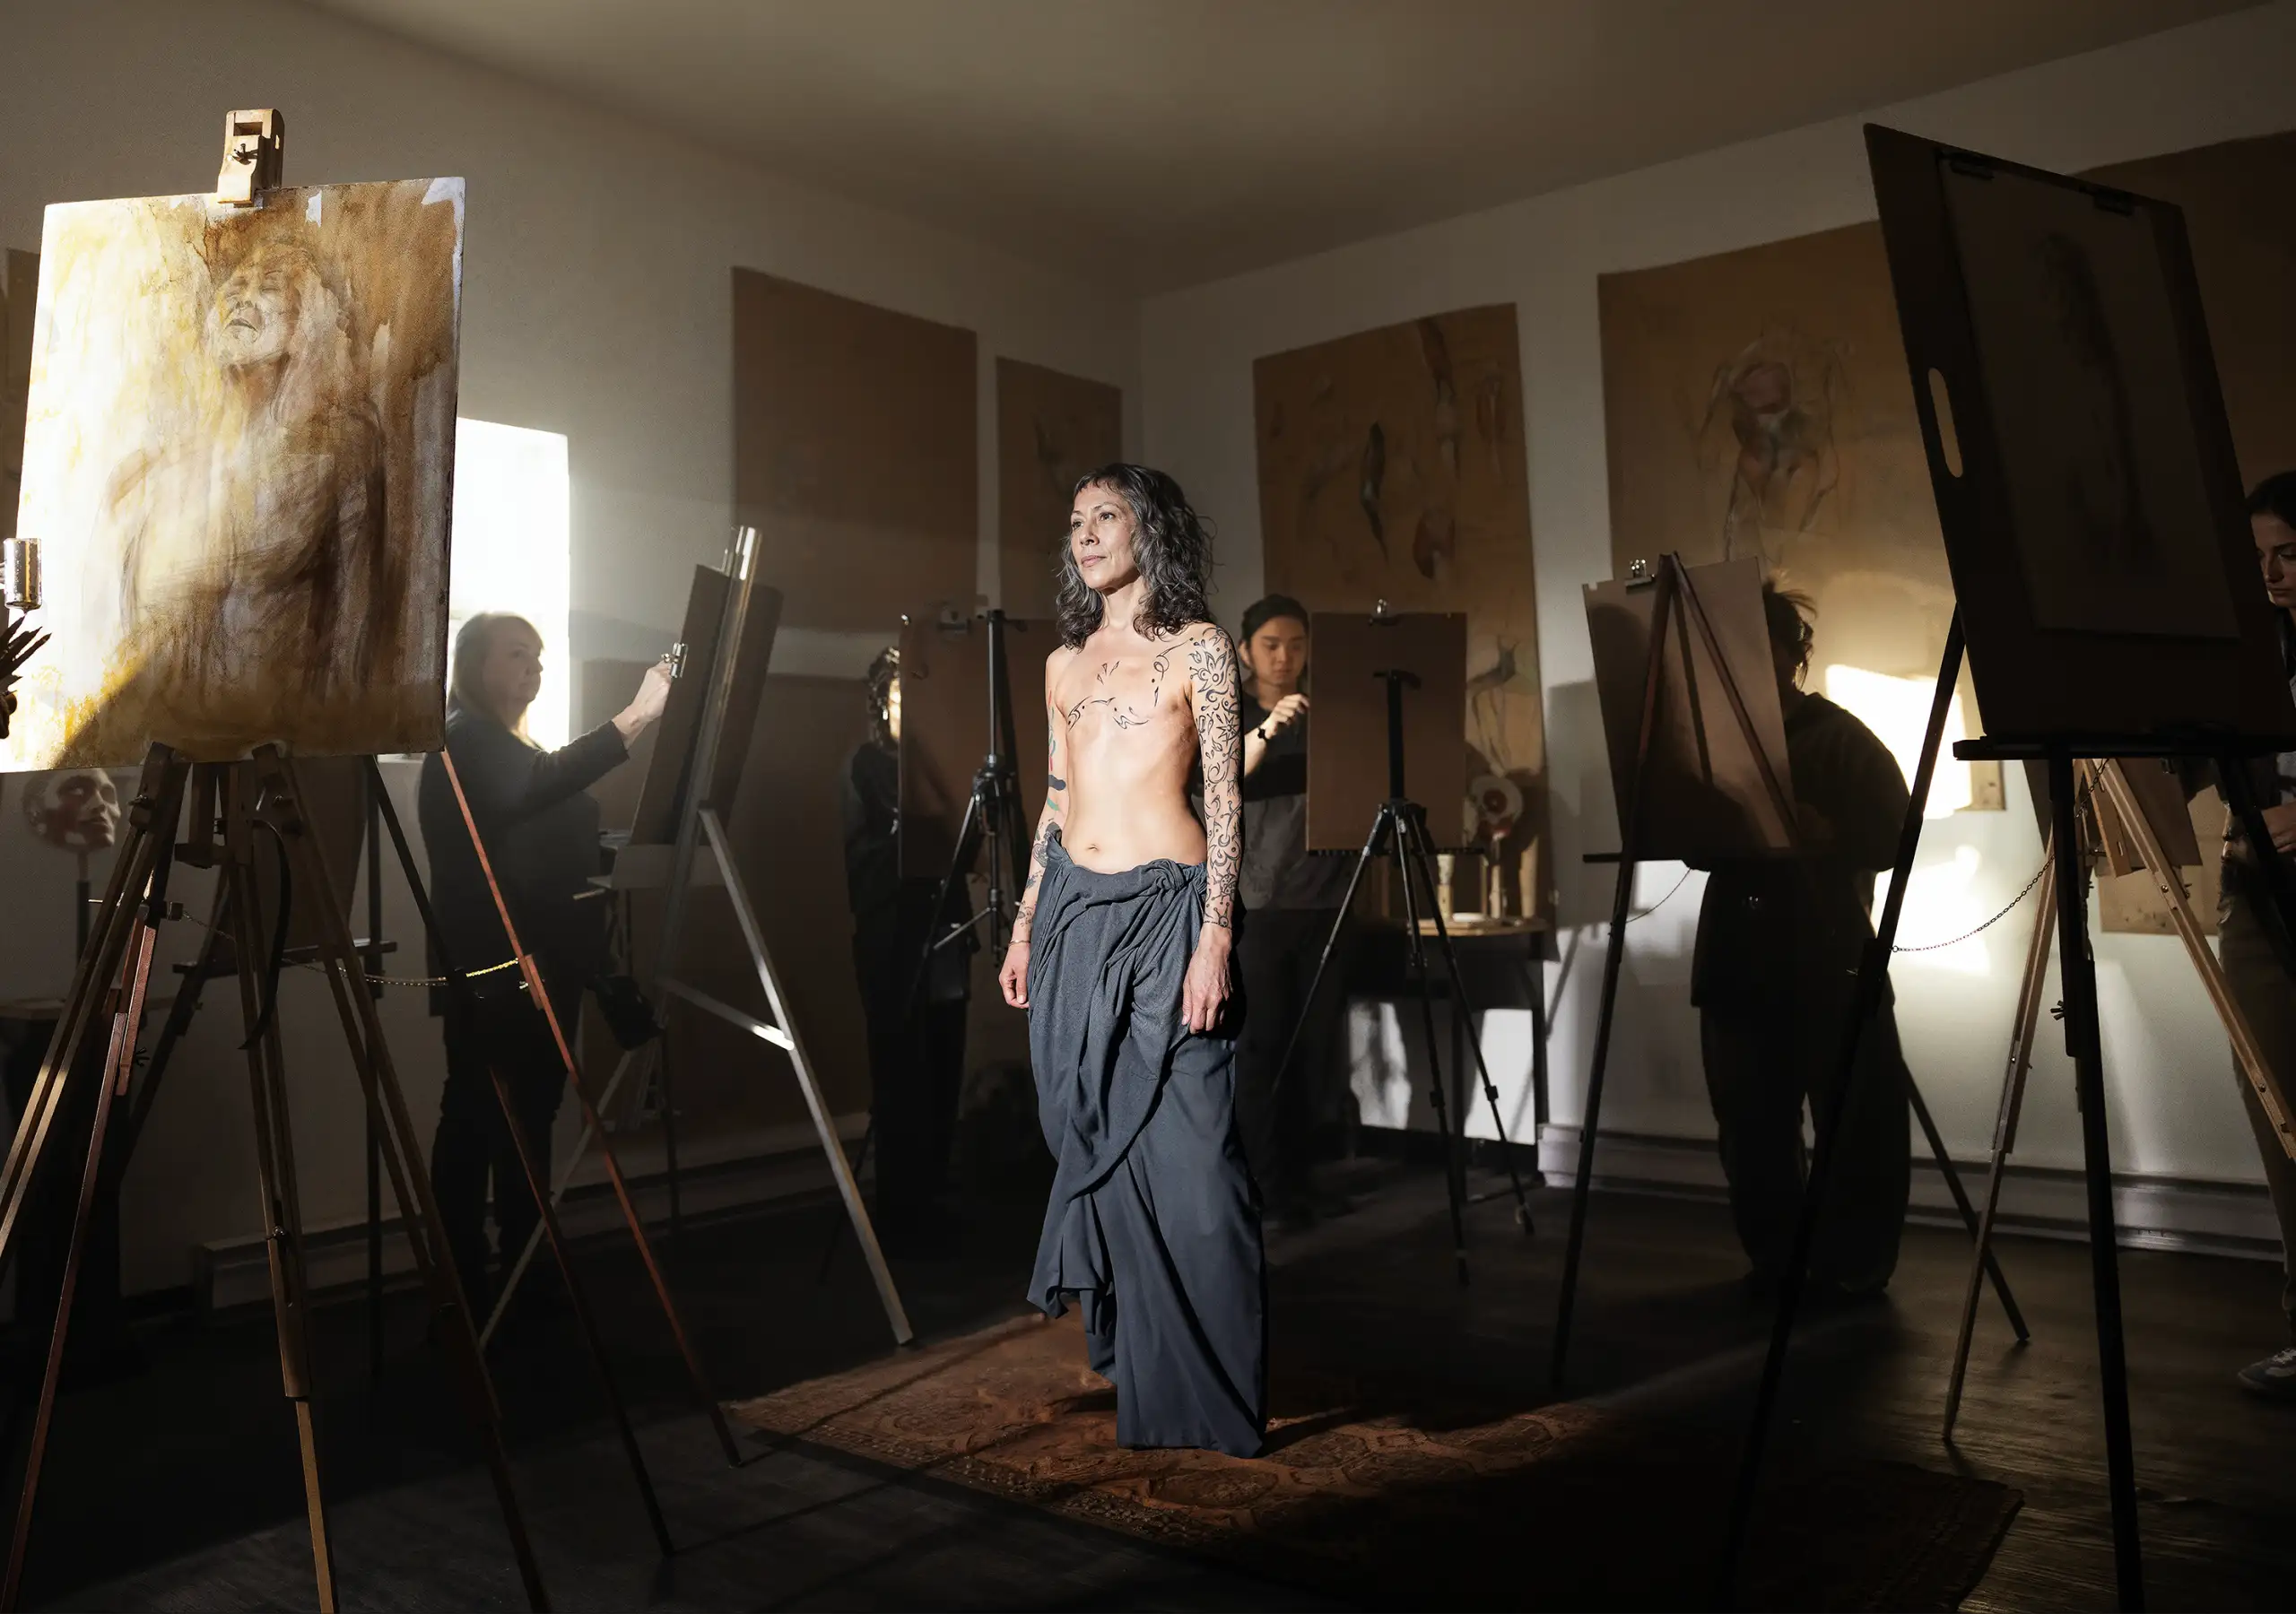 Mika posing in the studio surrounded by artists at their easels